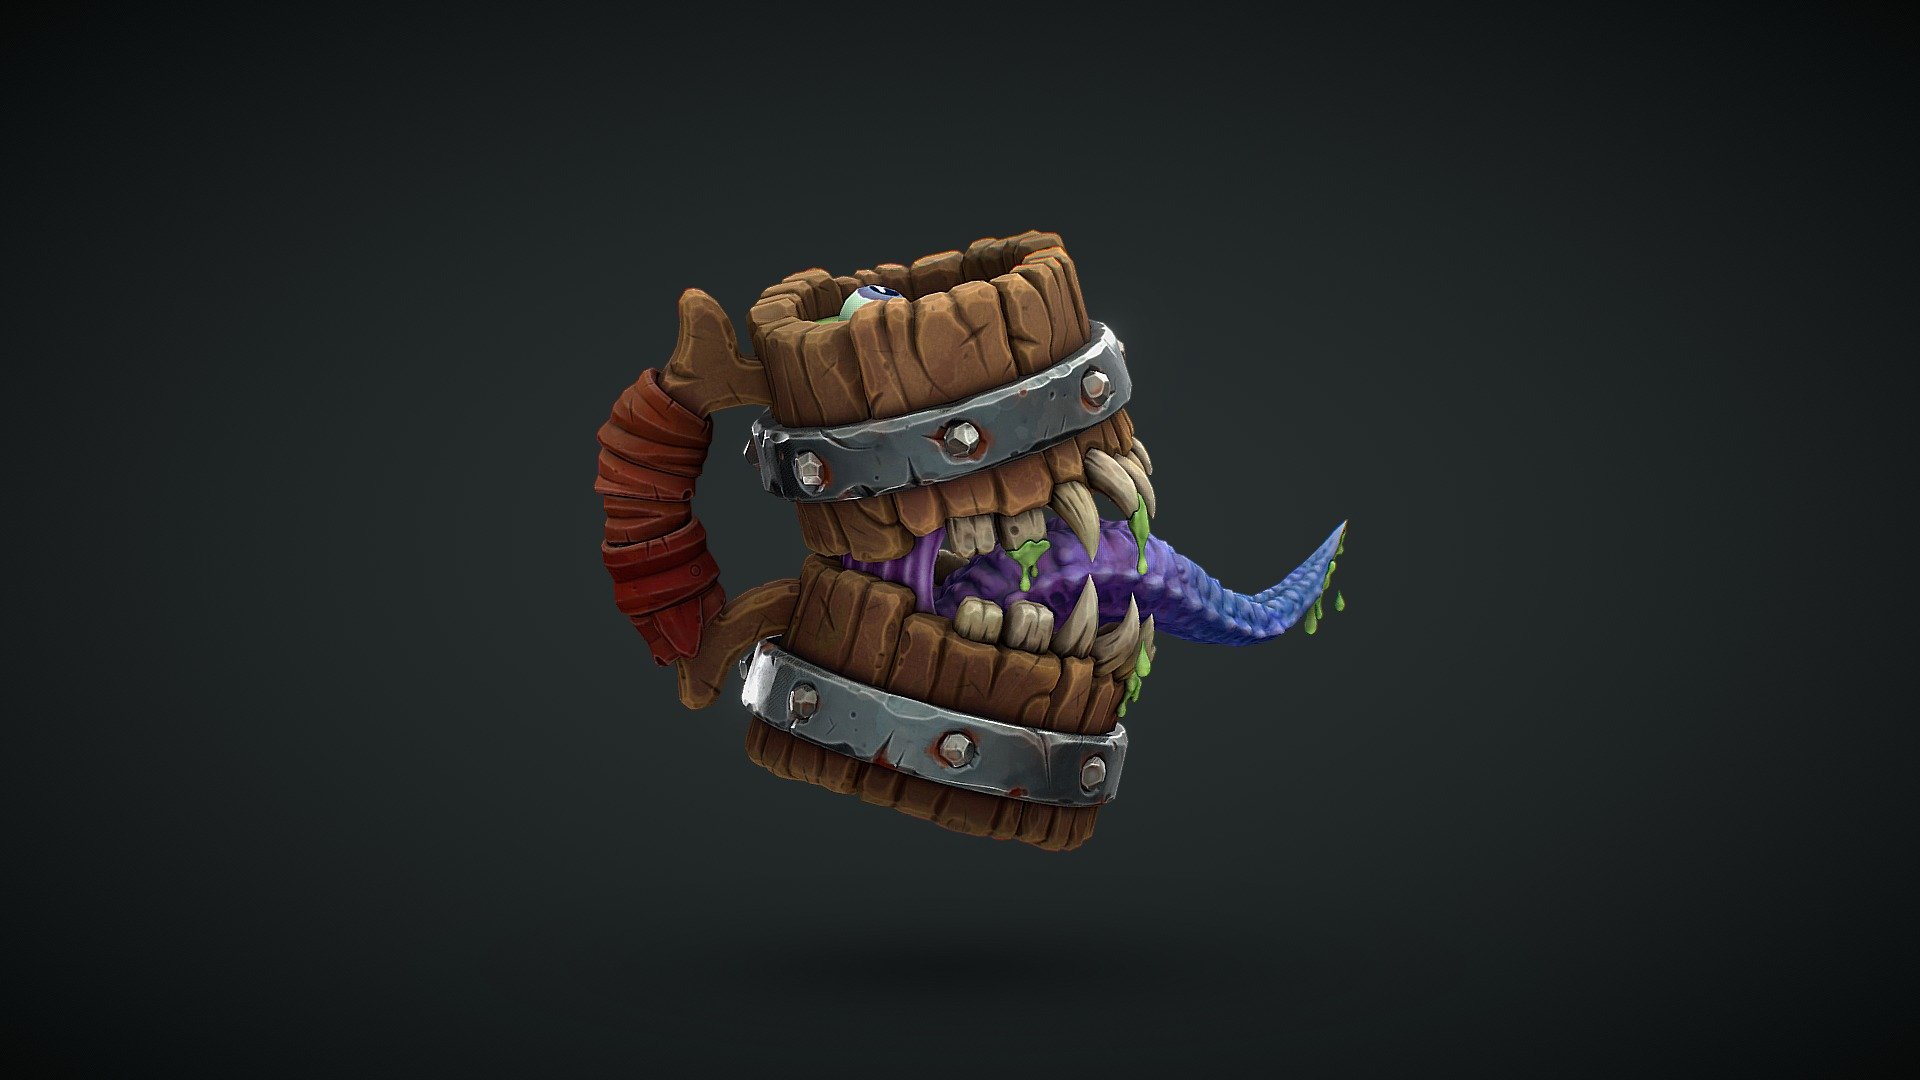 Modelled in blender, sculpted in zbrush and textured in substance painter.

polycount (in tris): 19,152 - Mimic mug - 3D model by Kamien (@Kamien37) 3d model